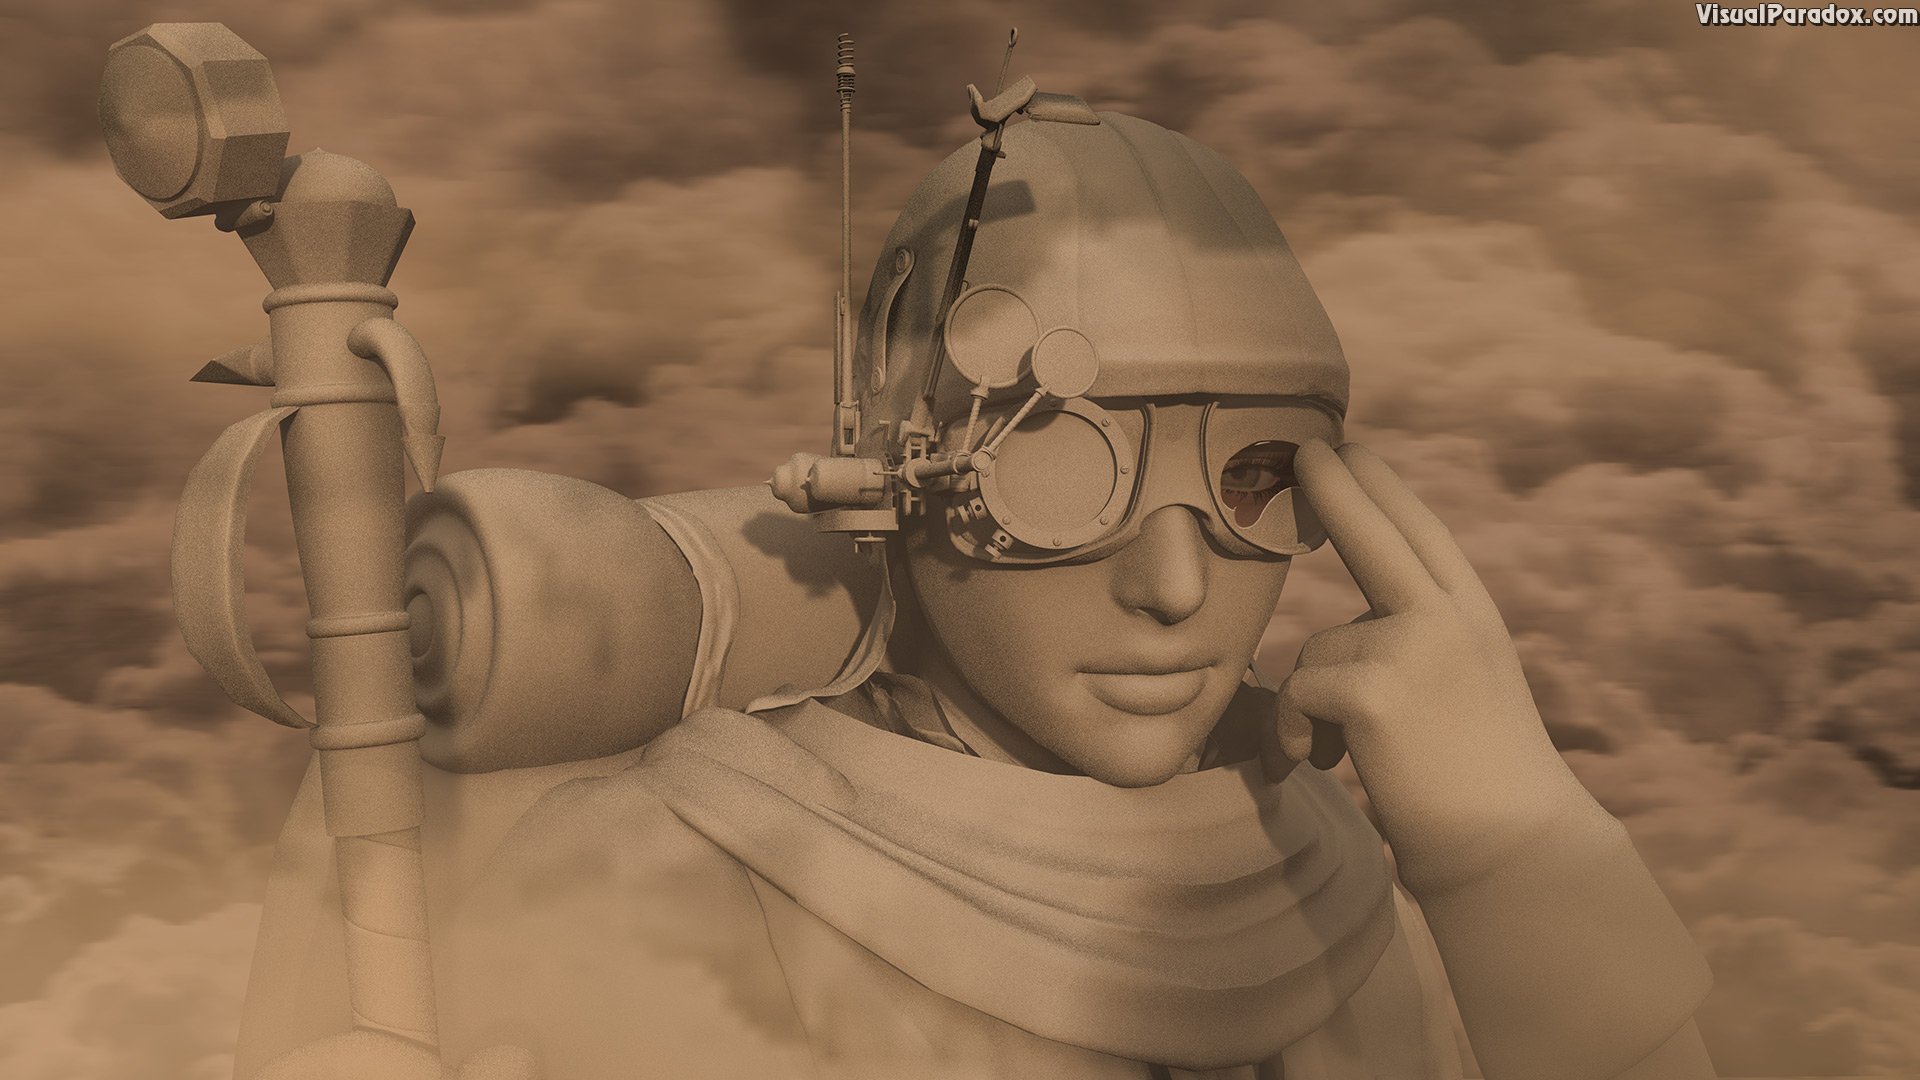 duststorm, adventure, adult, aviator, background, blind, blinded, blowing, bowl, cloak, clothes, cloud, clouds, coat, coating, cyberpunk, desert, dirty, dry, dust, dusty, explorer, face, fashion, female, girl, glasses, googles, grit, grunge, haboob, headphones, industrial, lady, lenses, looking, lost, mother, natural, nature, optics, outdoor, outfit, person, posing, punk, radio, retro, sand, sandstorm, steam, steampunk, storm, style, tubes, visibility, wall, weather, west, wild, wind, woman, you, 3d, wallpaper